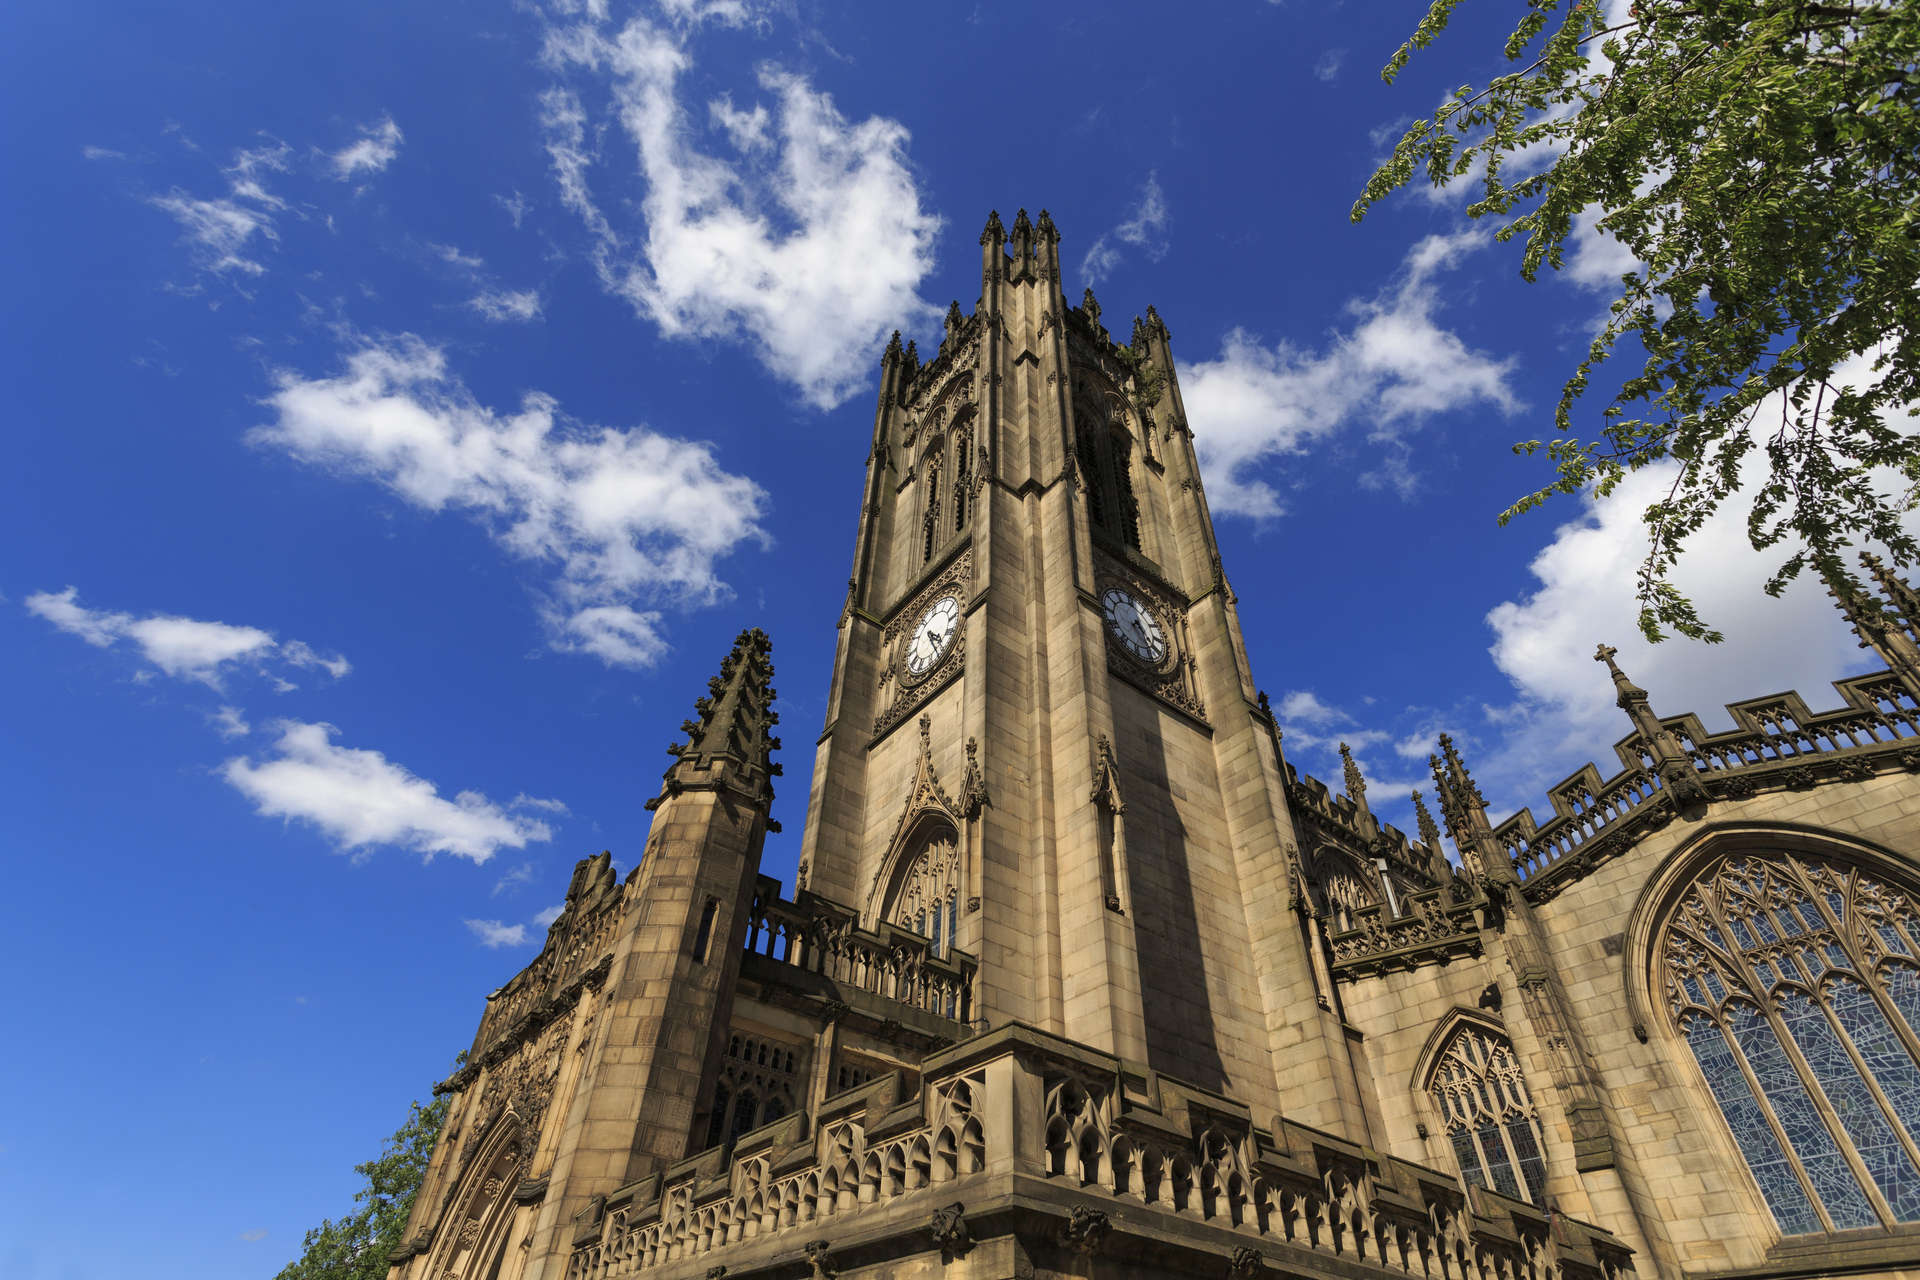 Manchester Cathedral or the Cathedral and Collegiate Church of St Mary, St Denys and St George located on Victoria Street